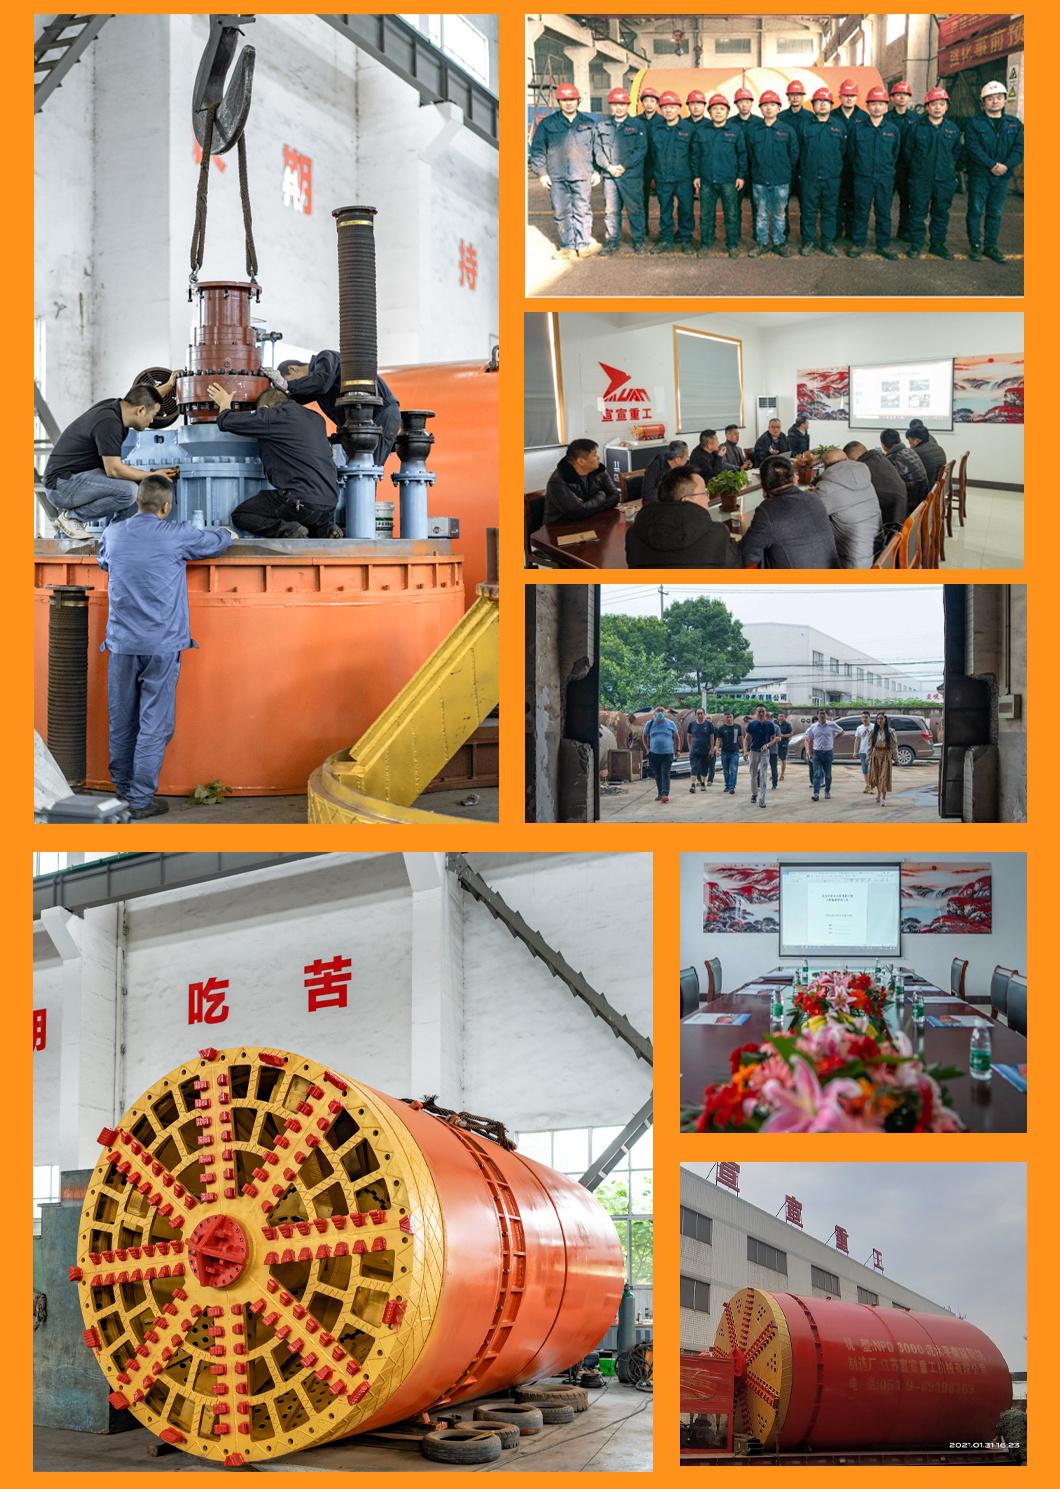 Npd Slurry Compound Balance Pipe Jacking Tunneling Boring Machine for Soft Soil